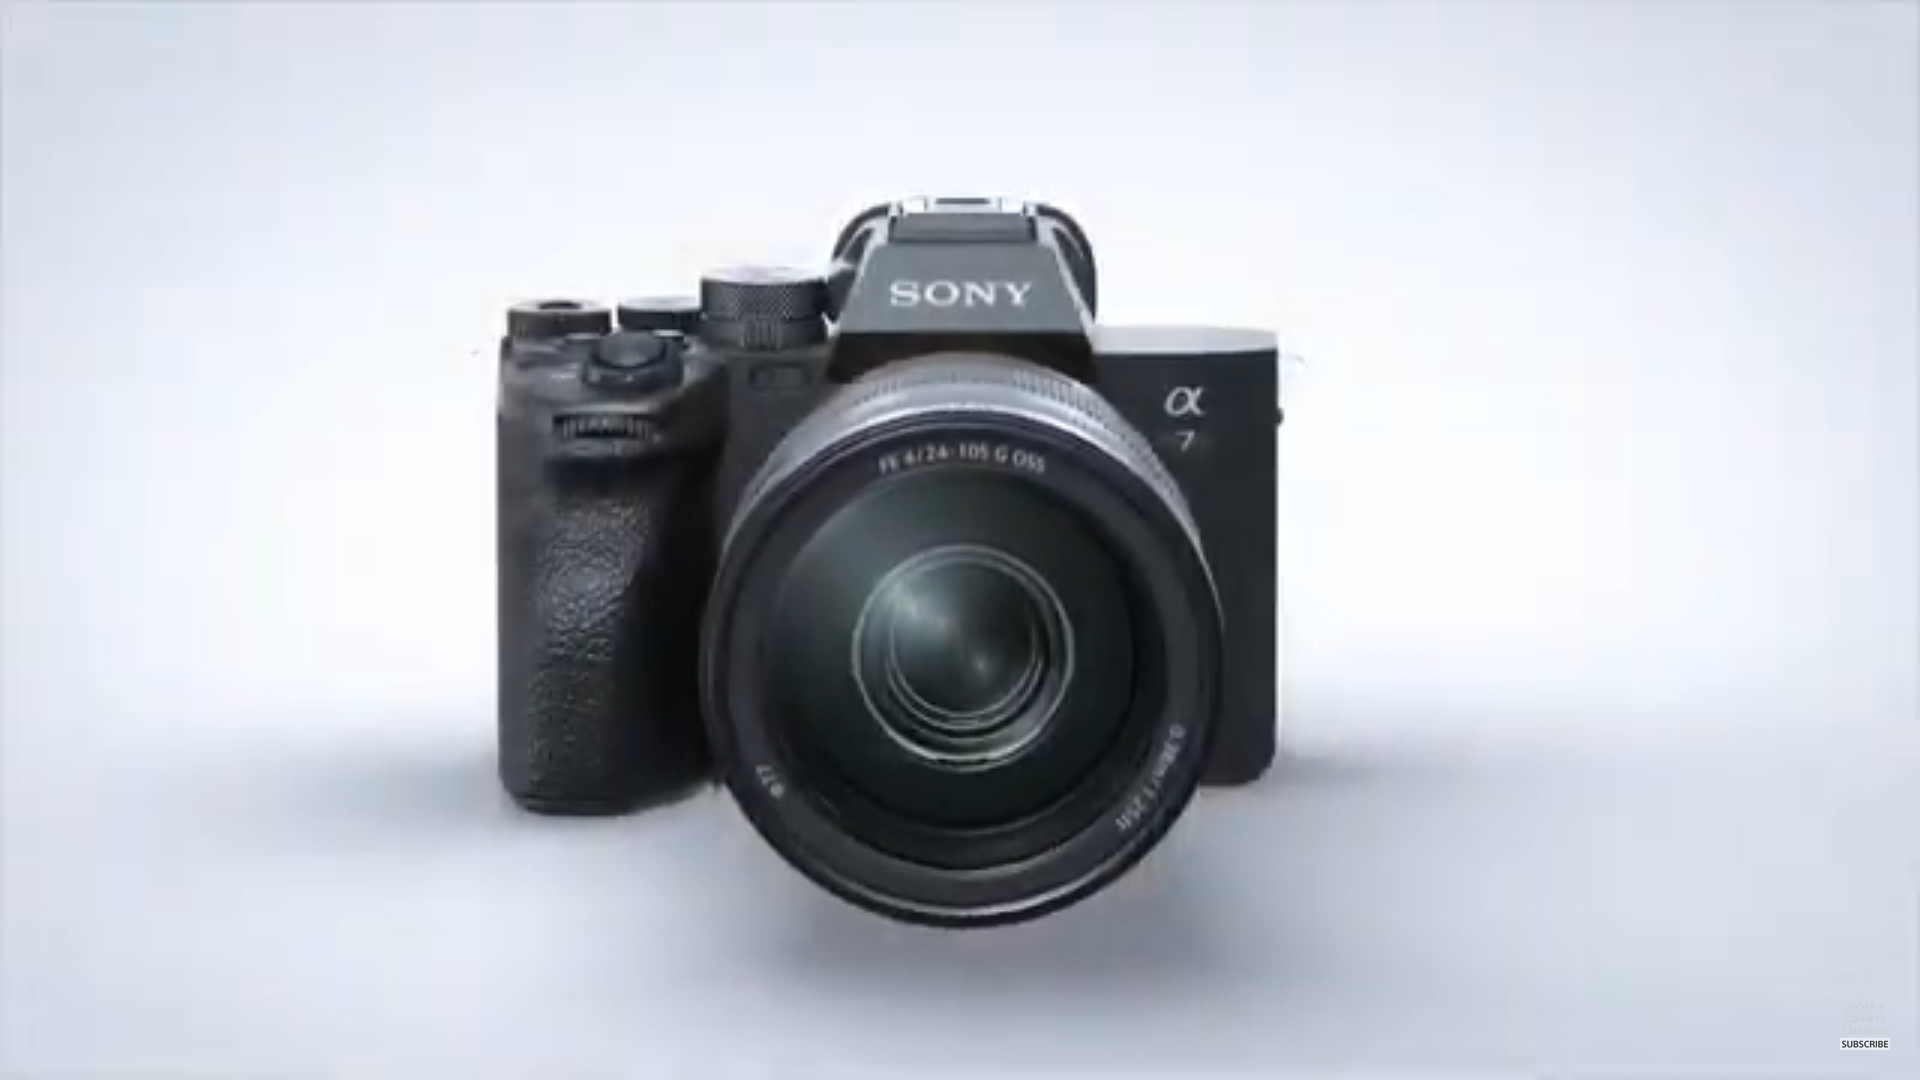 Sony launches fourth generation Alpha 7 full-frame mirrorless camera